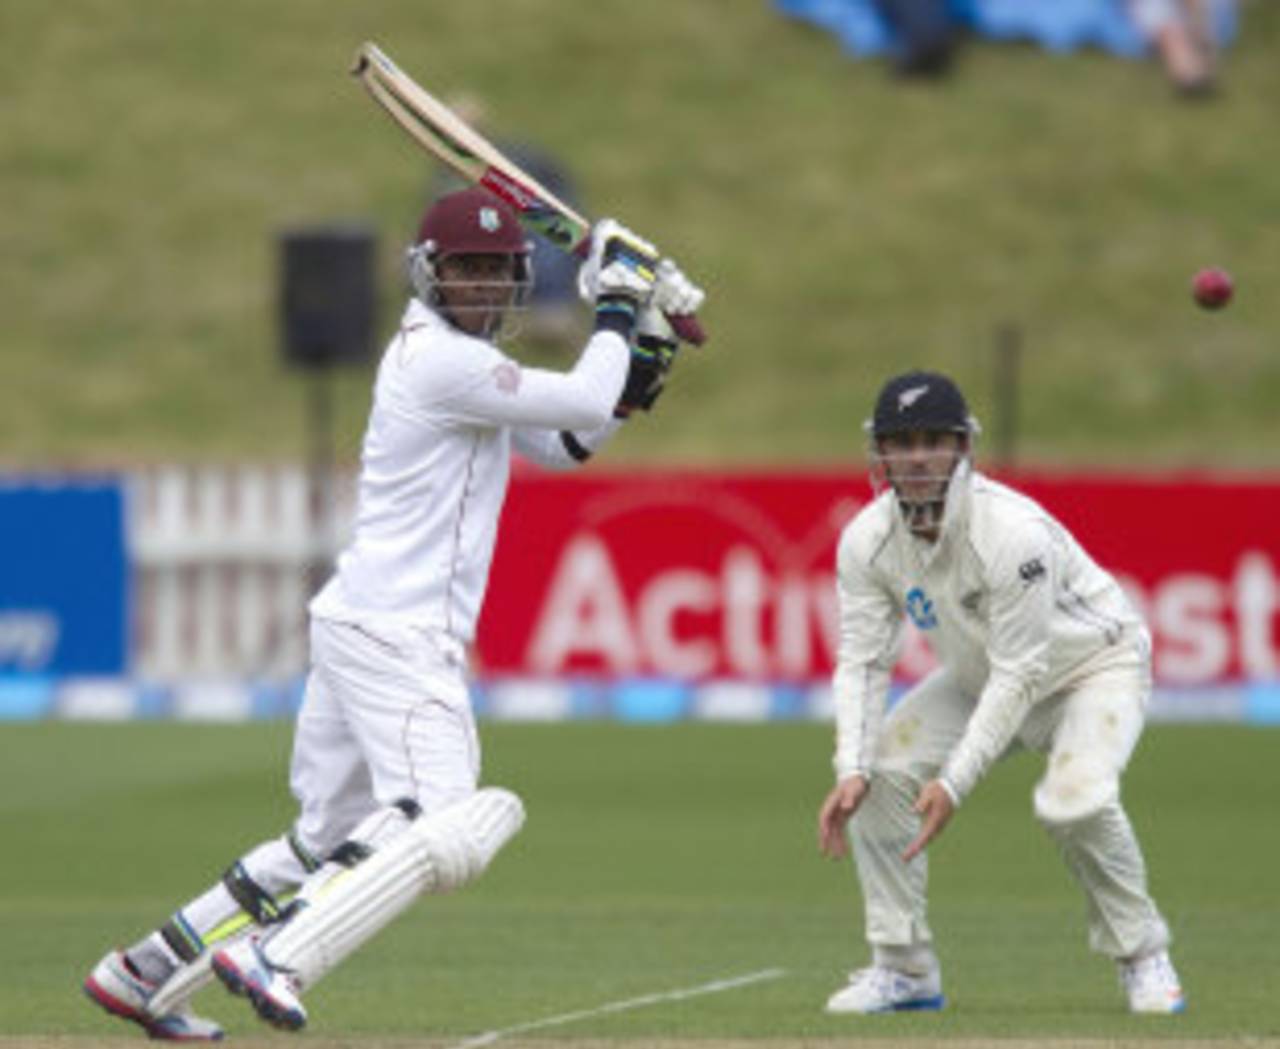 Marlon Samuels' failure in the Test series was a setback for a struggling West Indies side&nbsp;&nbsp;&bull;&nbsp;&nbsp;Getty Images